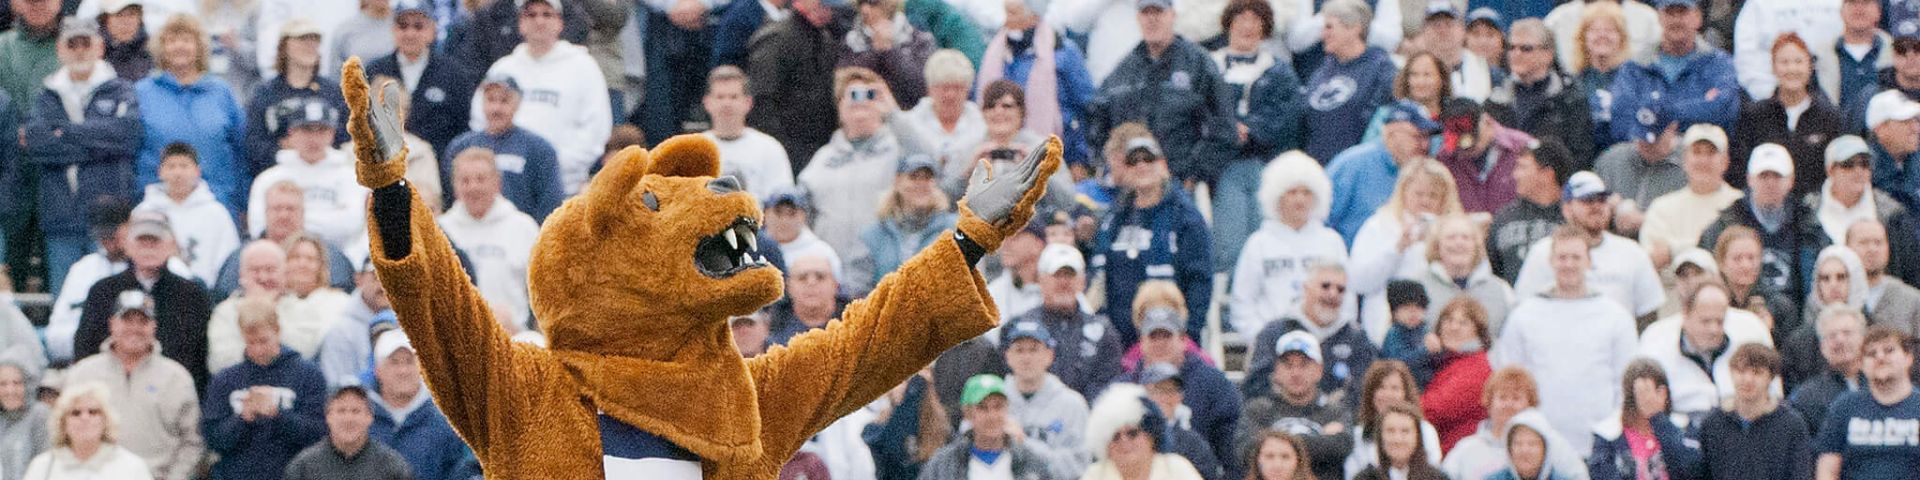 Nittany Lion mascot standing on football turf with arms raised in front of Penn State football fans mainly wearing white and blue.